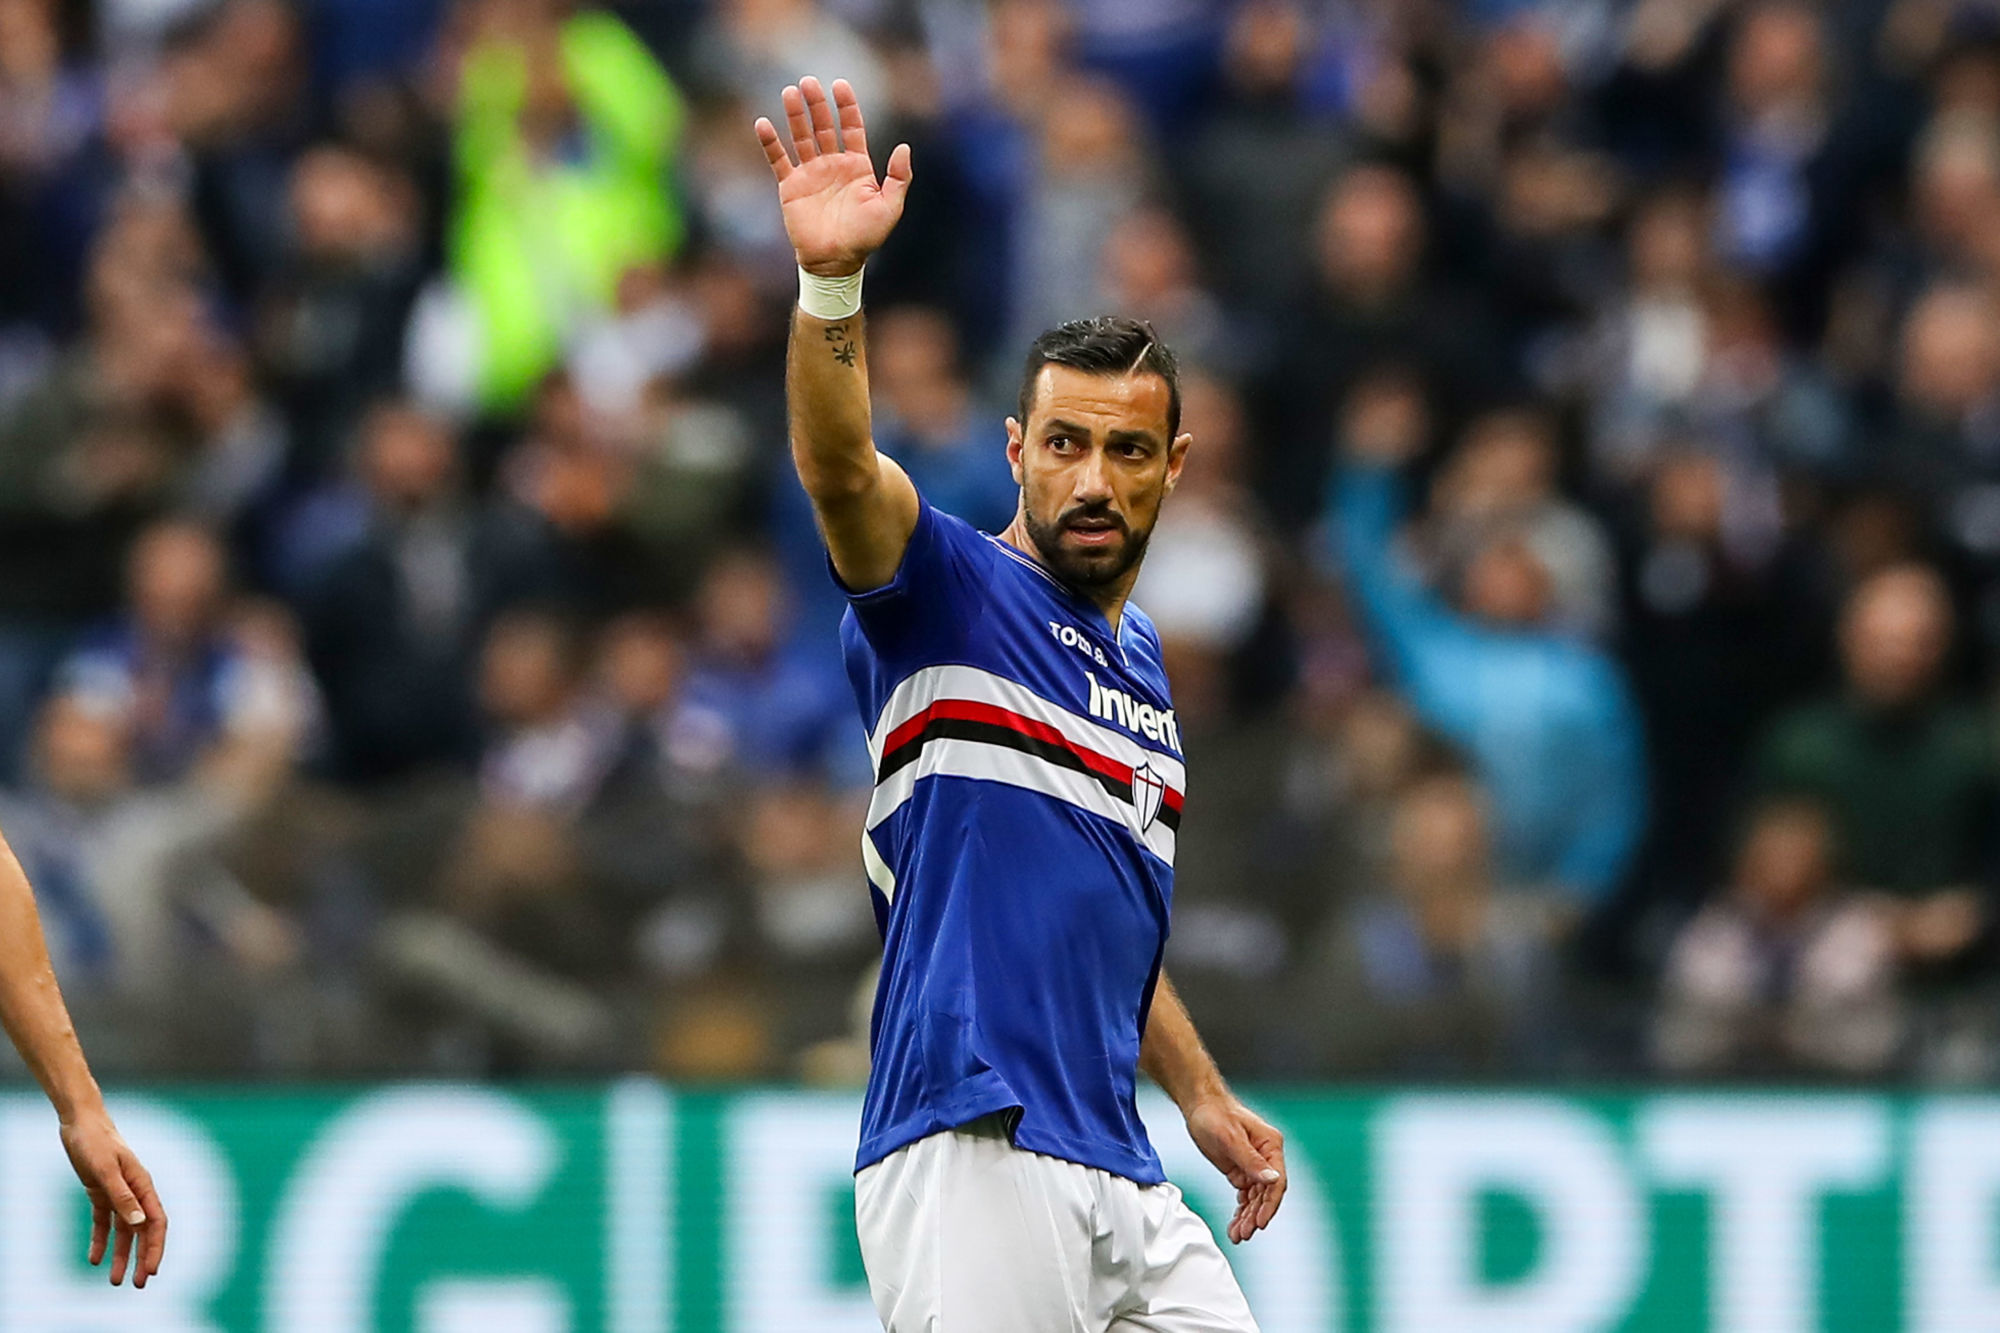 Fabio Quagliarella of Sampdoria waves to fans as he is substituted during the Serie A match at Luigi Ferraris, Genoa. Picture date: 26th May 2019. Photo : Spi / Icon Sport